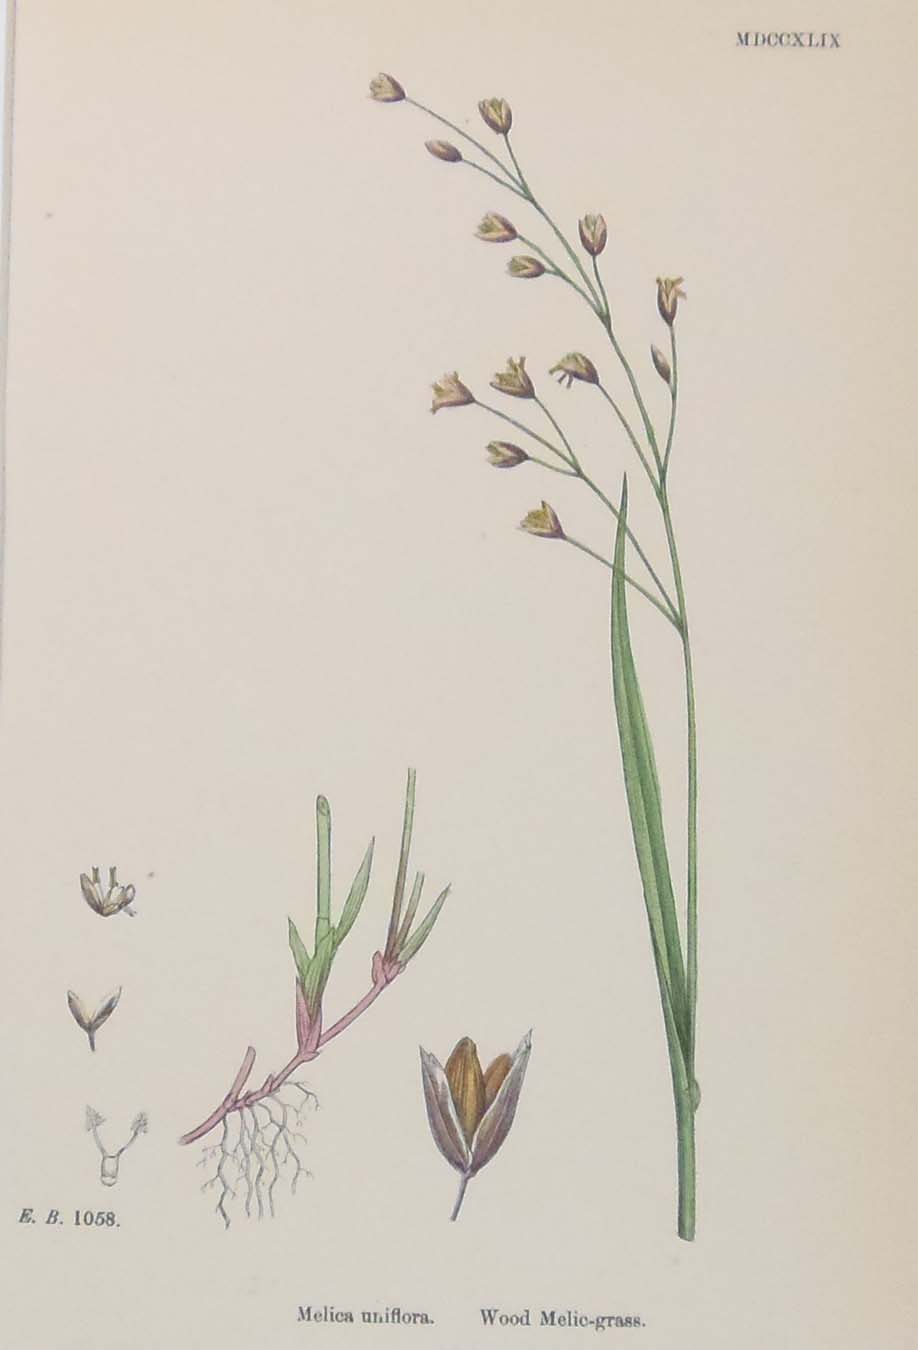 Antique hand coloured botanical prints, a pair after James Sowerby titled Nodding Melic Grass and Wood Melic Grass.